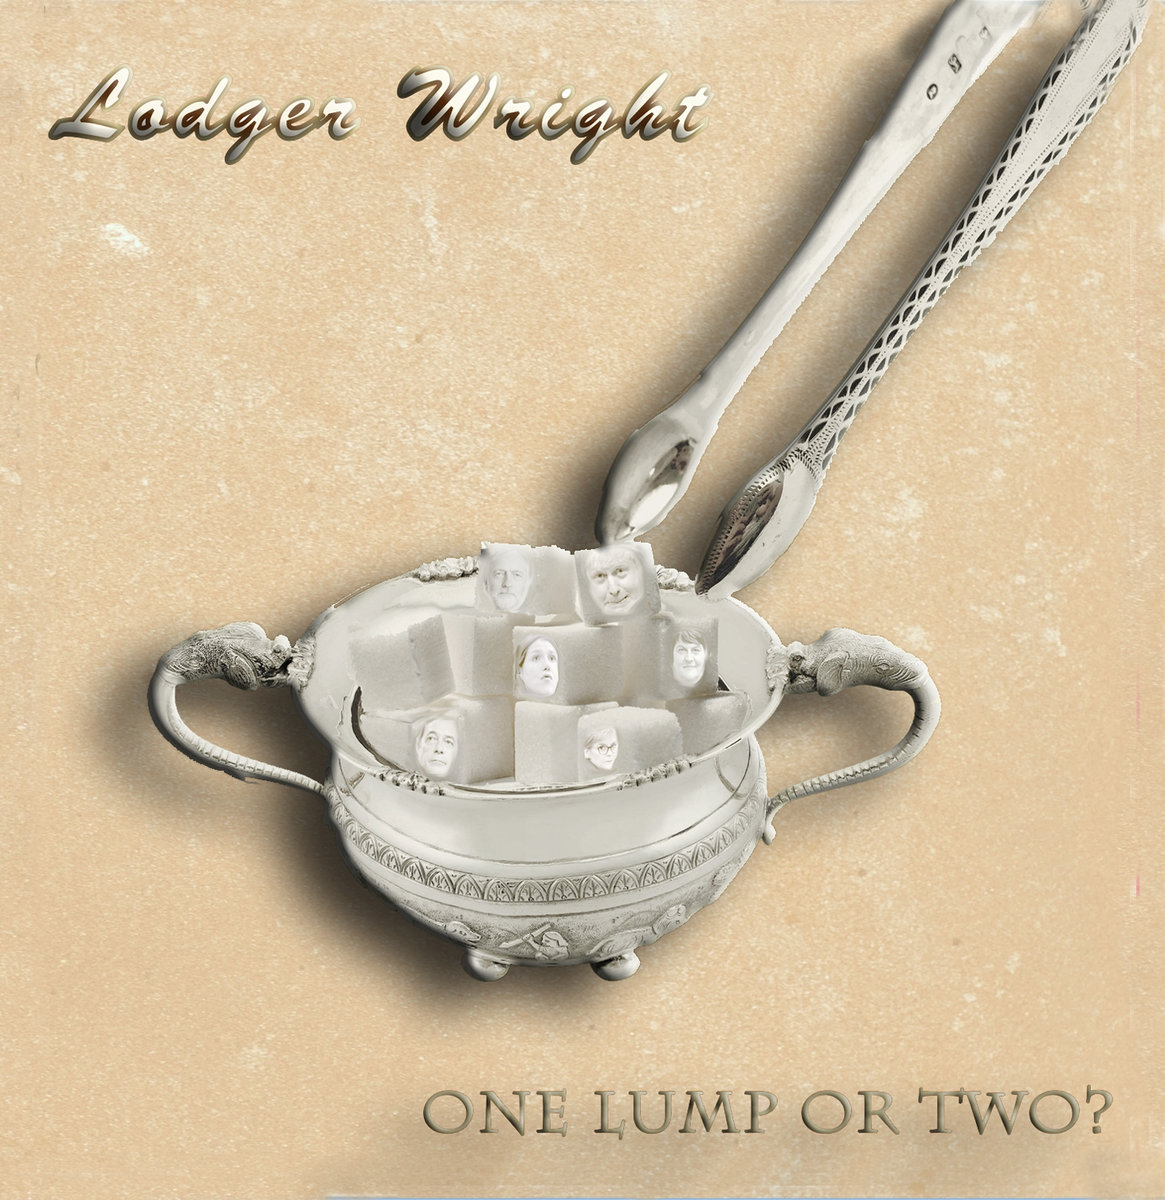 Lodger Wright – One lump or two? (2019) [FLAC 24bit/96kHz]